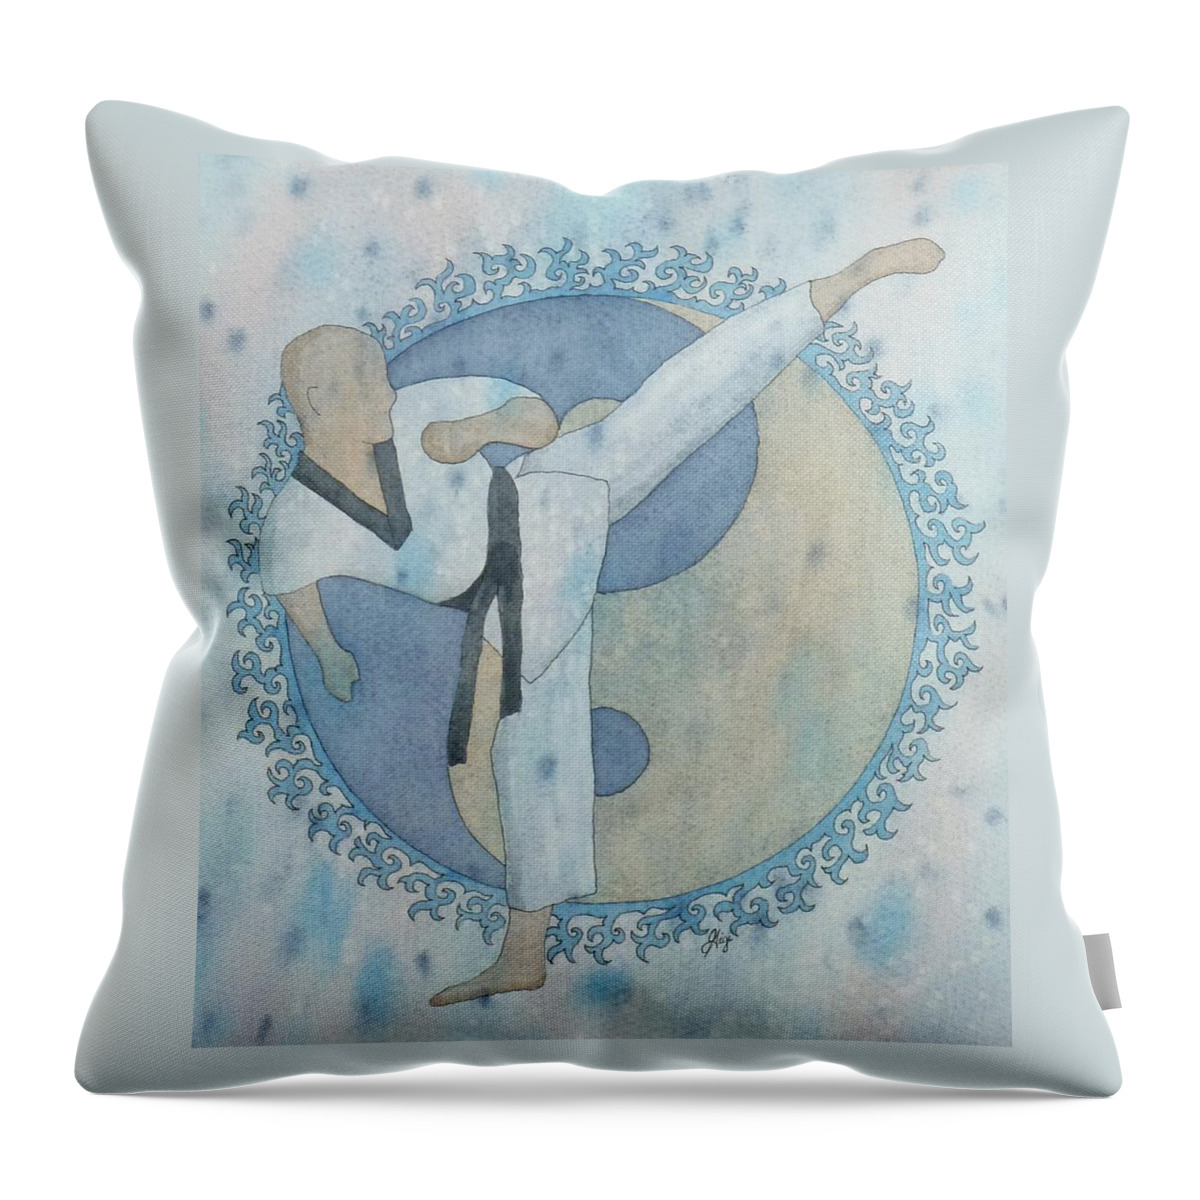 Sidekick Throw Pillow featuring the painting Aim High by Gigi Dequanne